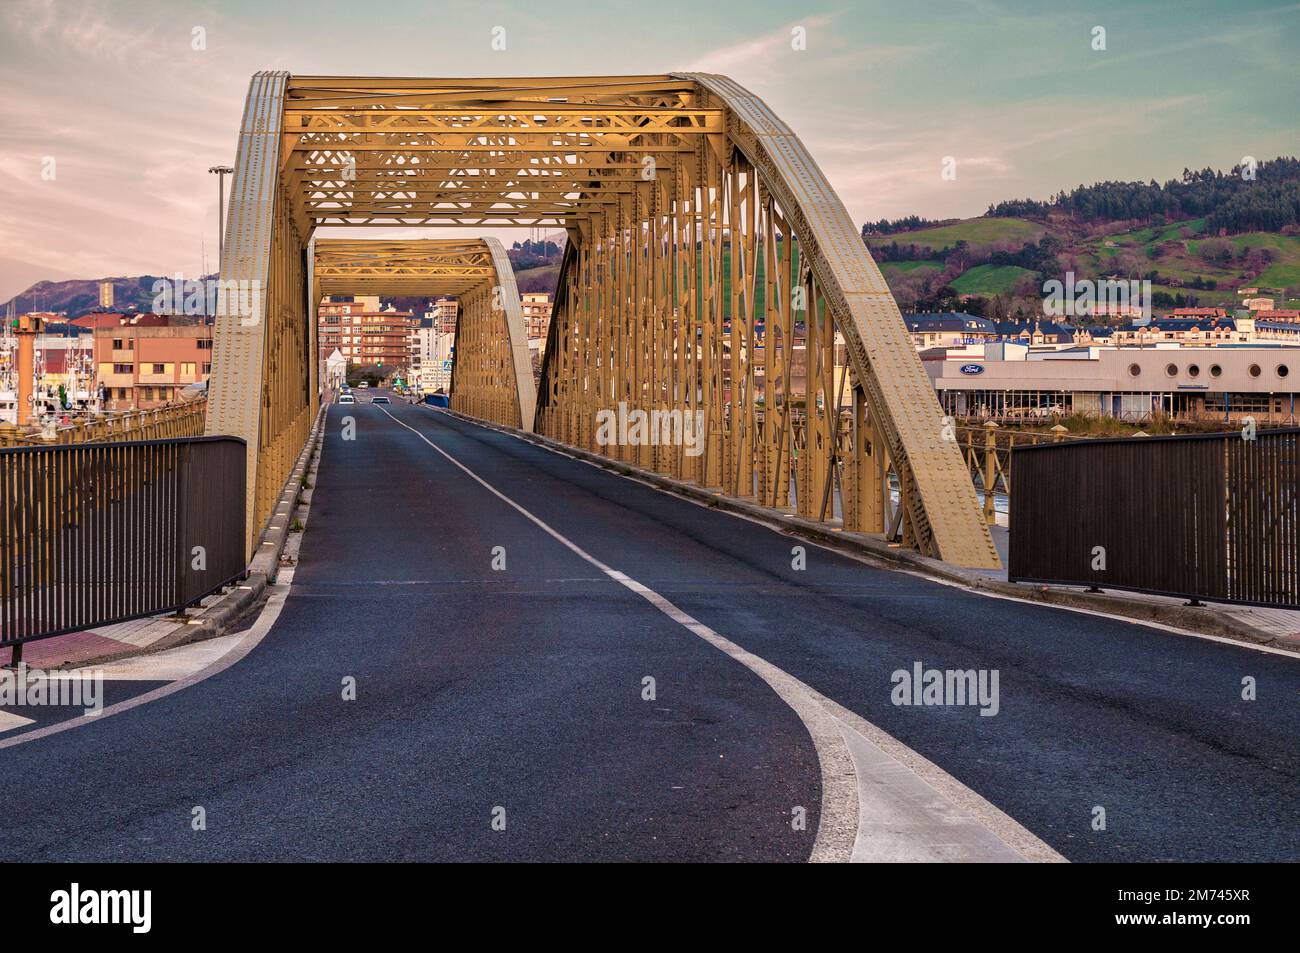 Rotary or Iron Bridge is located on the River Ason, Among Colindres and Treto, Spain, Europe Stock Photo